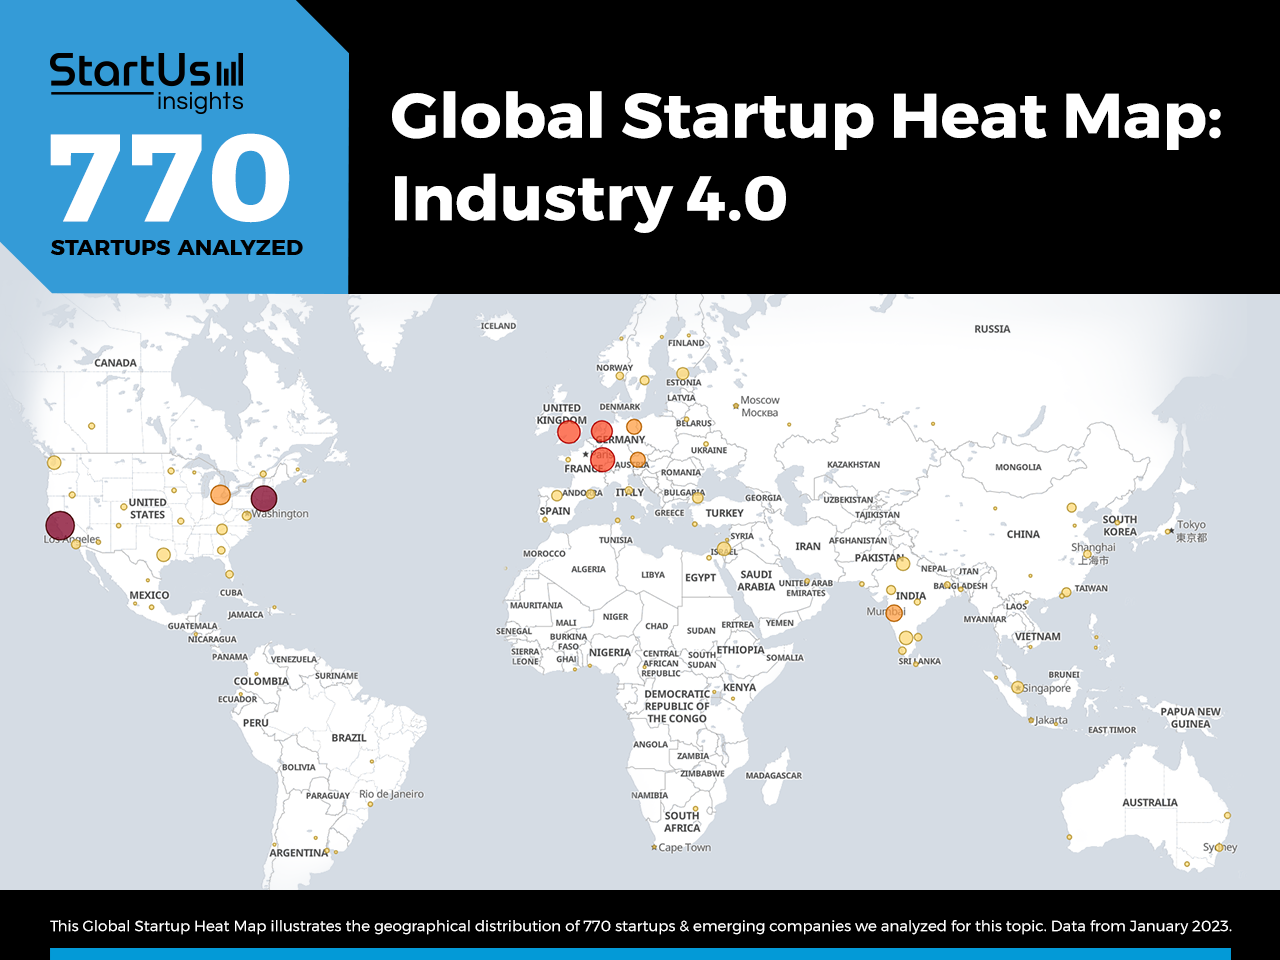 Industry-4.0-trends-Startups-TrendResearch-Heat-Map-StartUs-Insights-noresize